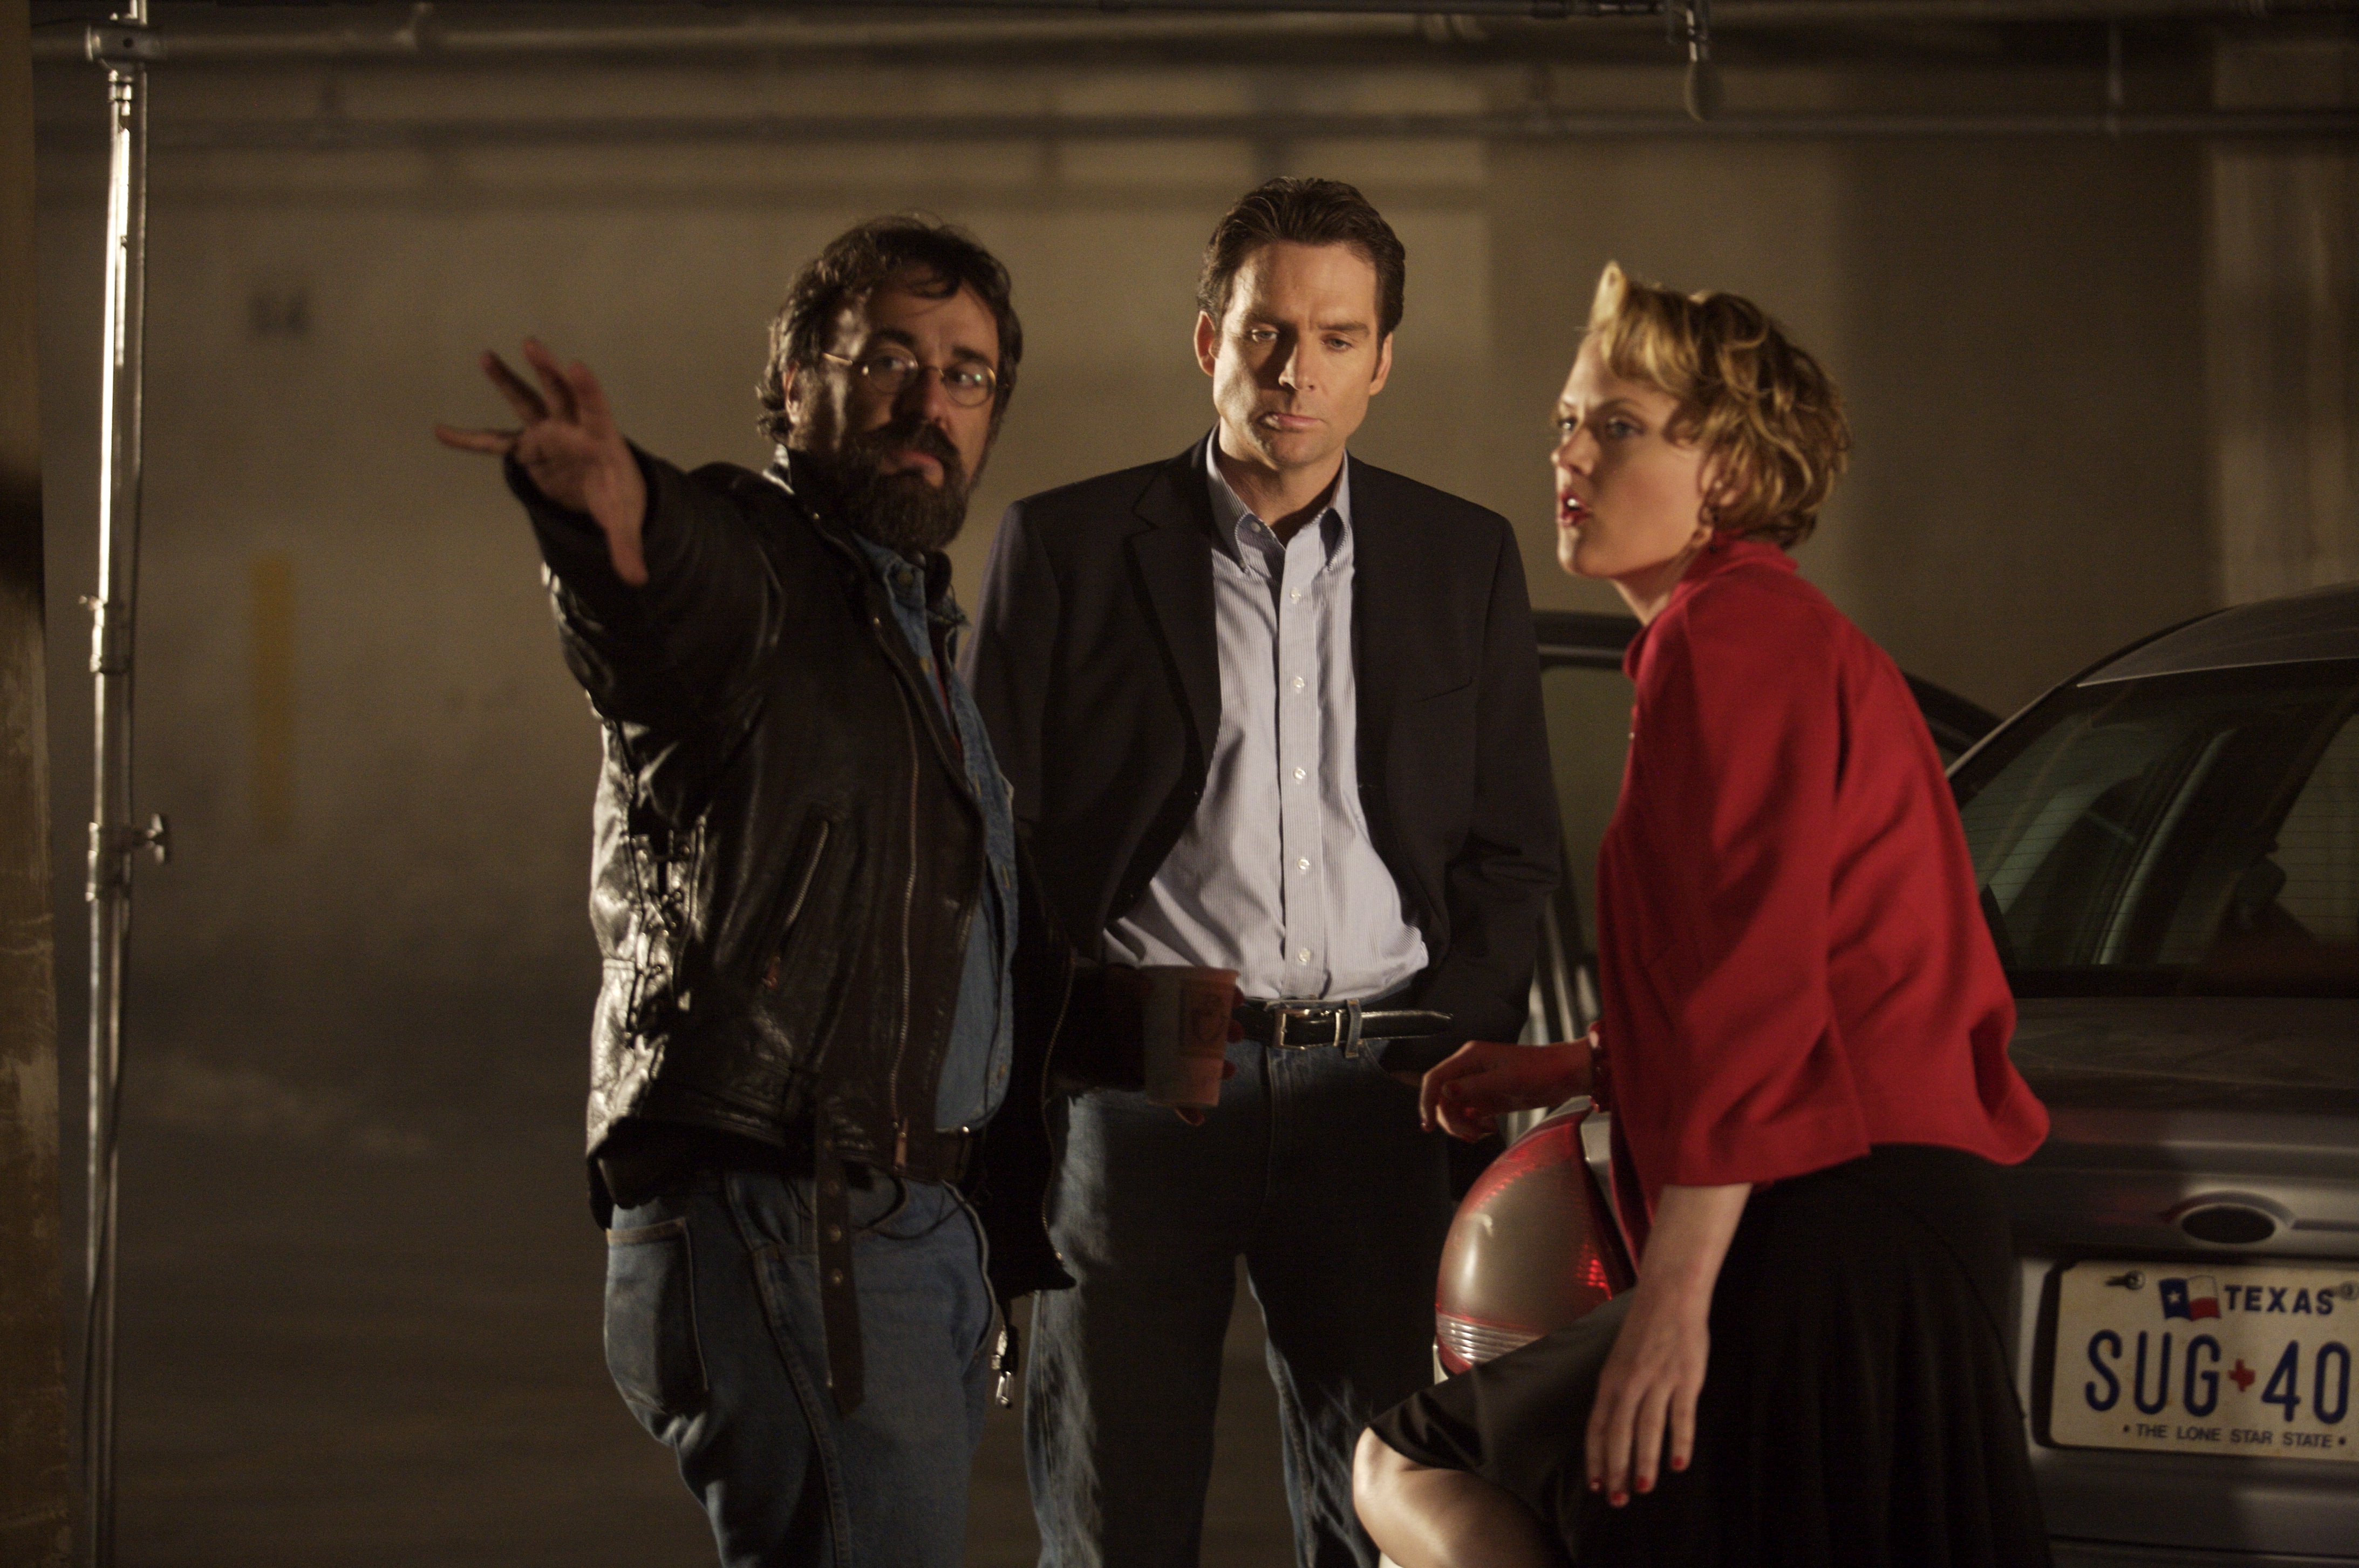 Writer-Director Michael Stokes blocks out a scene from THE BEACON with David Rees Snell and Elaine Hendrix.